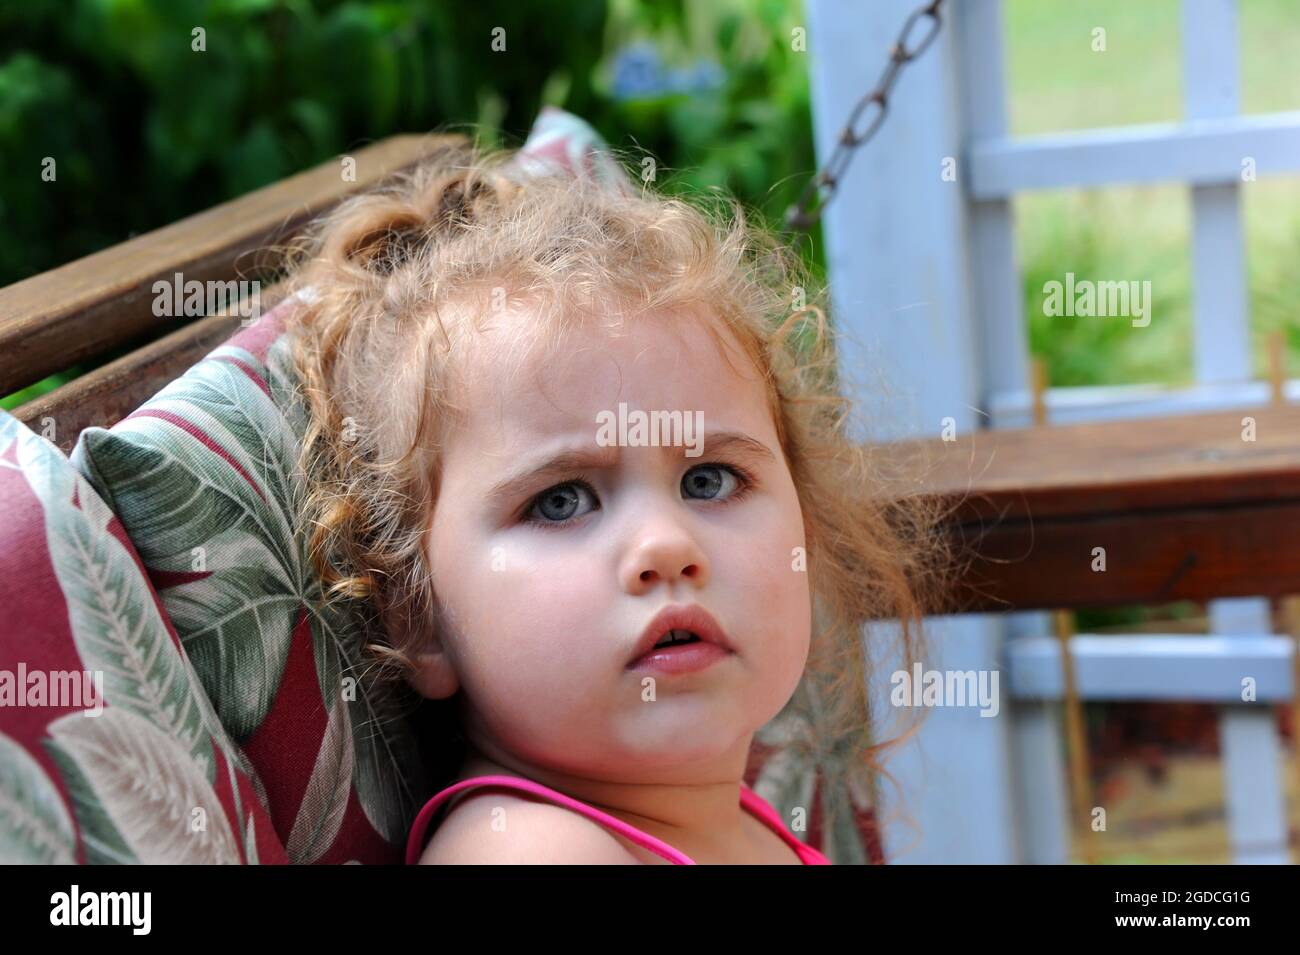 Frown lines perch on a sweet faced little girl.  she is crabby and grouchy as she sits on her front porch swing.  She has curly hair and a ponytail. Stock Photo